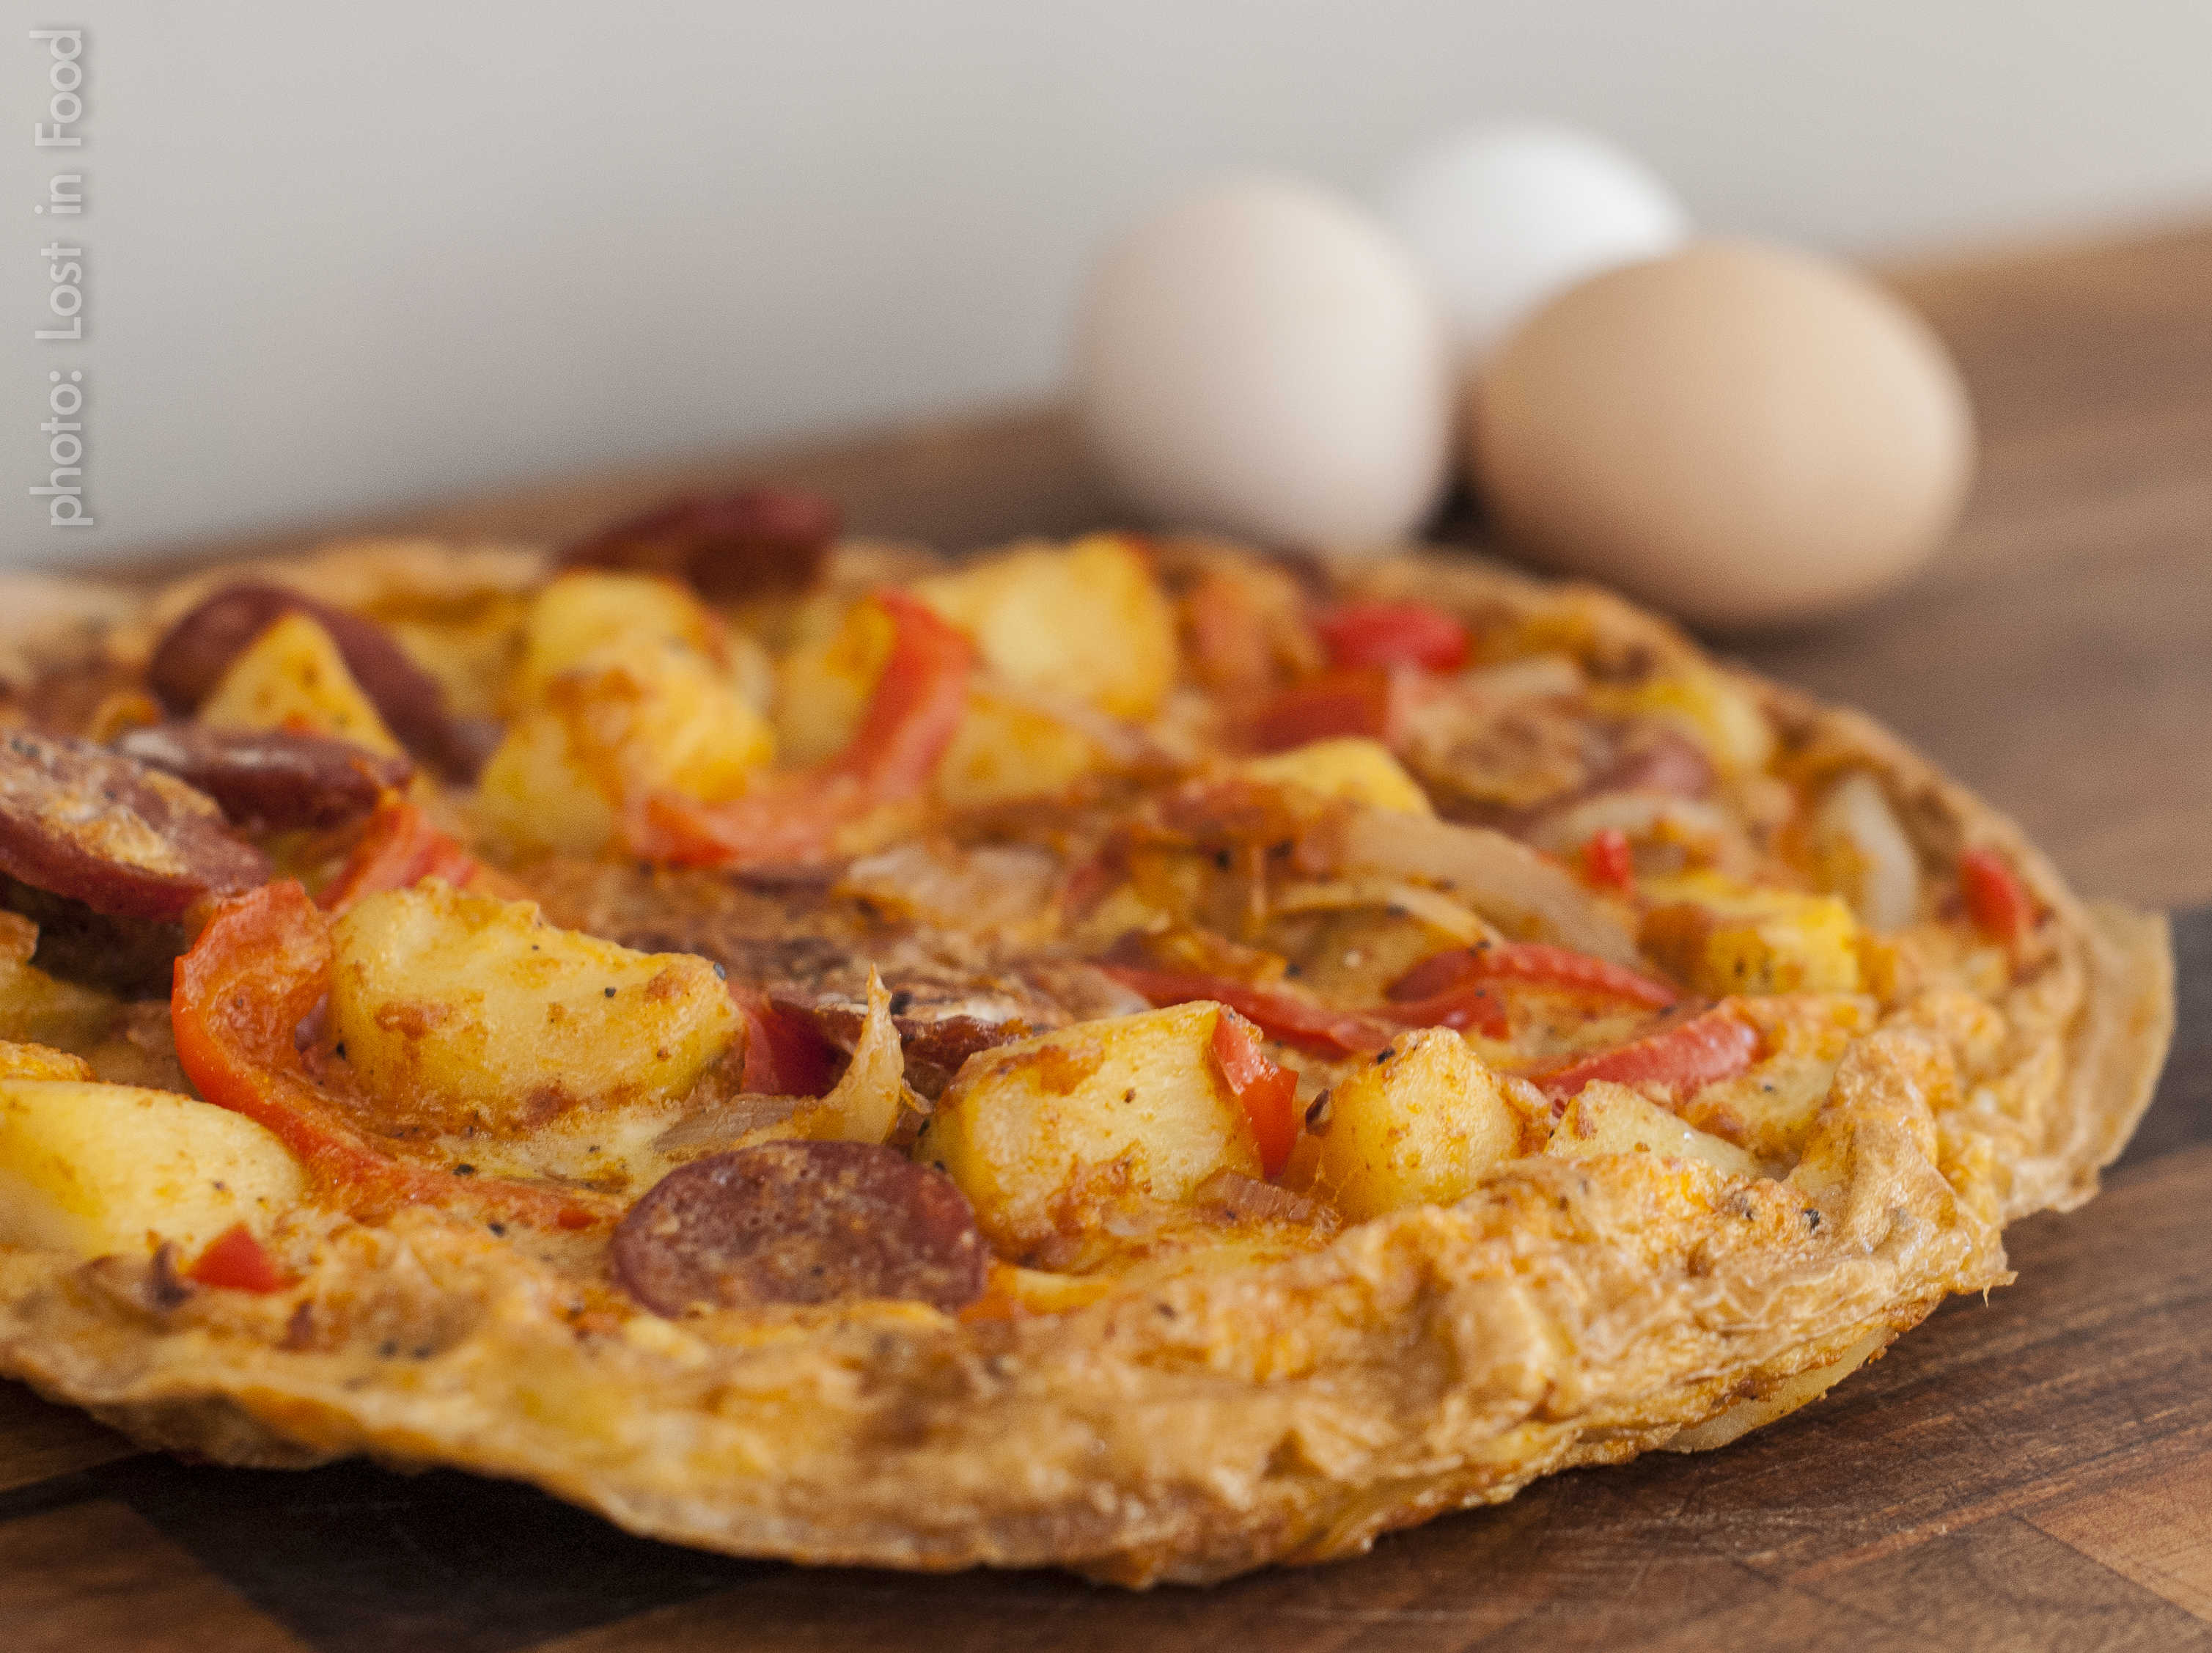 chorizo tortilla, with eggs as fresh as you can get! - Lost in Food